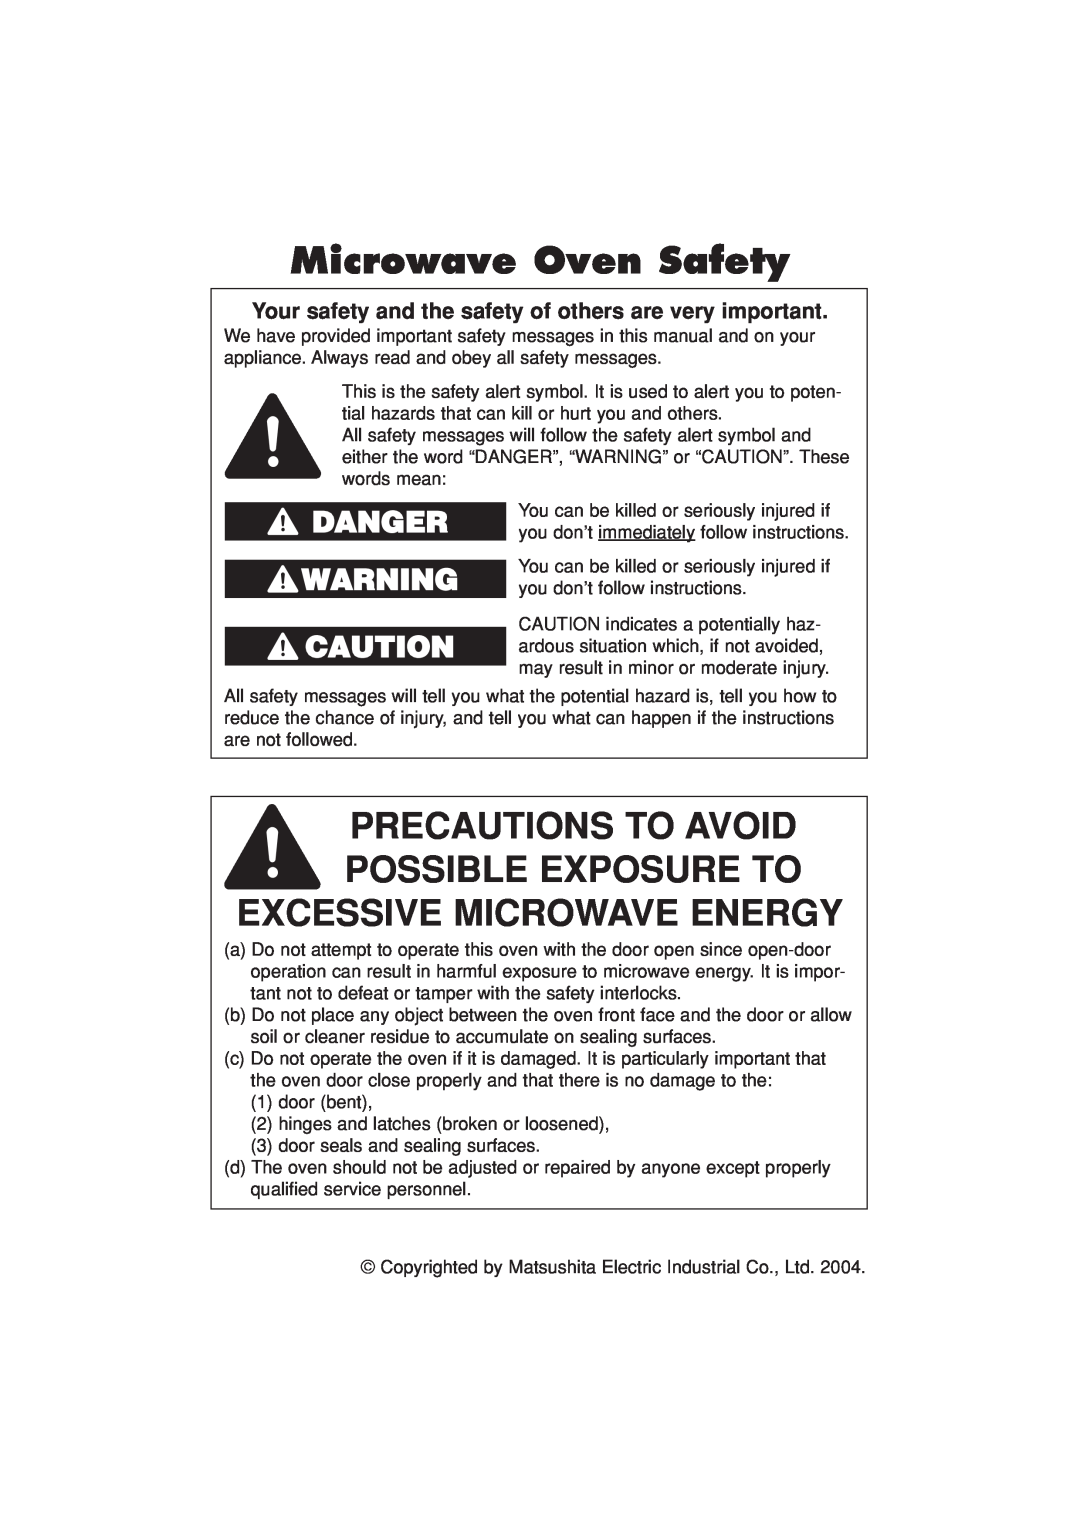 Panasonic NN-H504 Excessive Microwave Energy, Precautions To Avoid Possible Exposure To, Danger, Microwave Oven Safety 